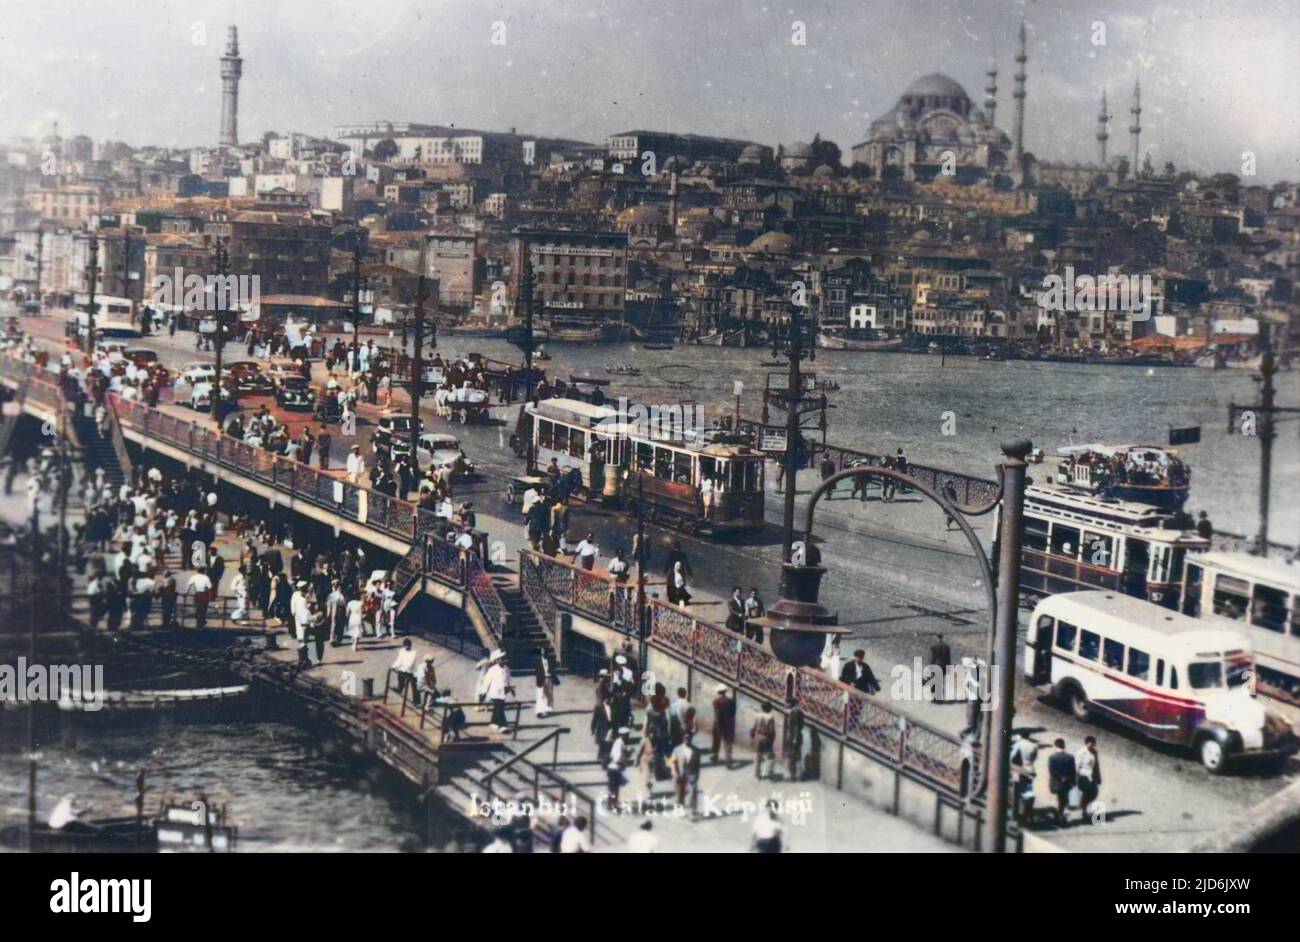 A view across the Galata Bridge and Golden Horn, with motorbuses, trams, cars and pedestrians packing the crossing. Colourised version of: 10285127       Date: circa 1930s Stock Photo